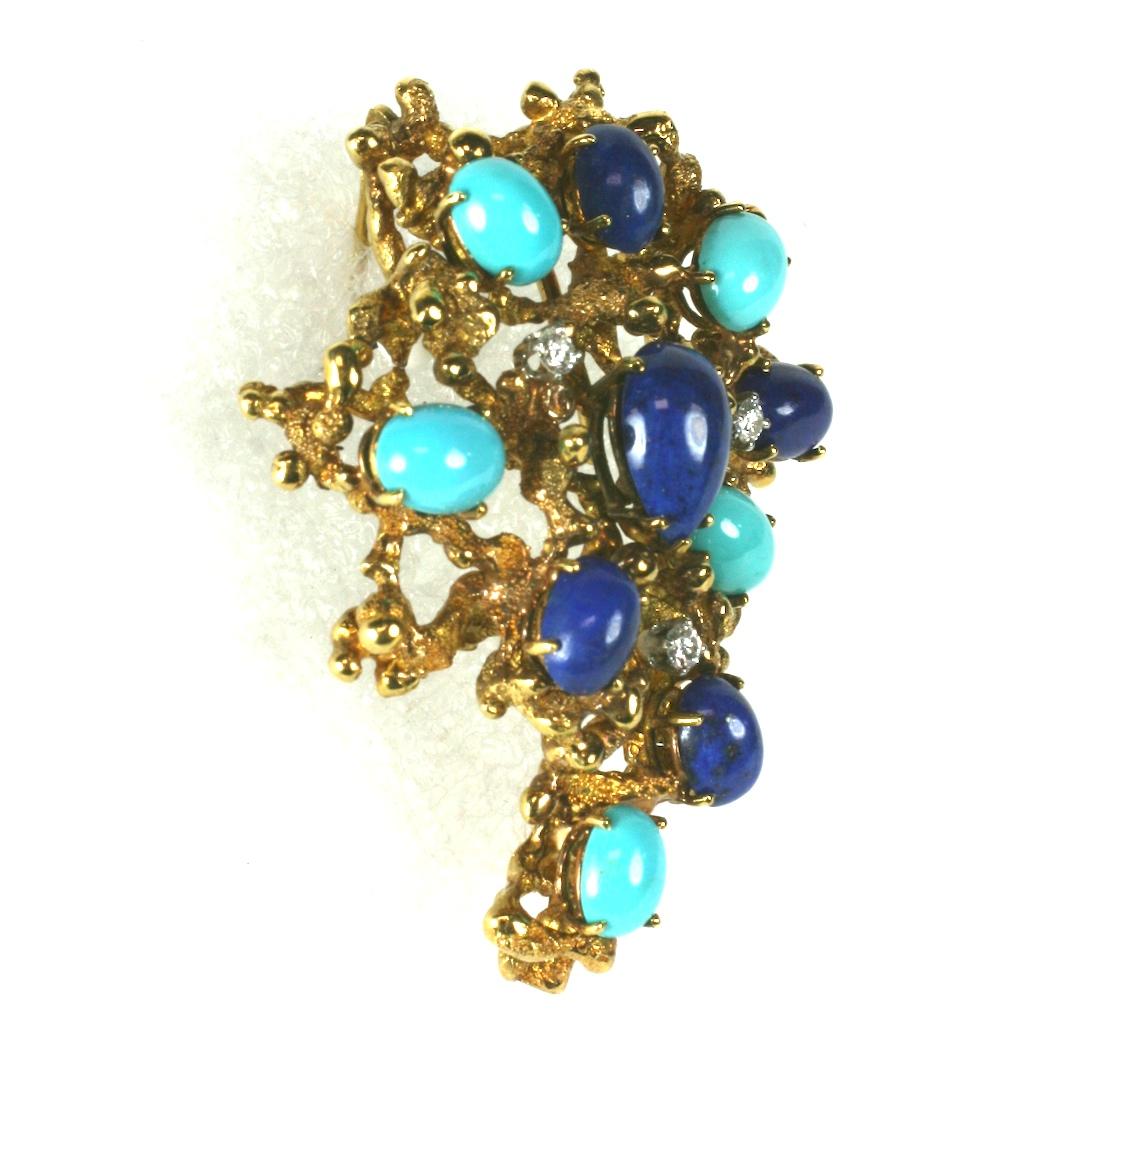 Brutalist Turquoise, Lapis and Diamond Brooch in heavy 18k gold setting. Oval and pear shaped stones are mounted above the dimensional setting with diamond accents.
Interesting, high quality setting. Stones to appear to be sitting on raised bed of